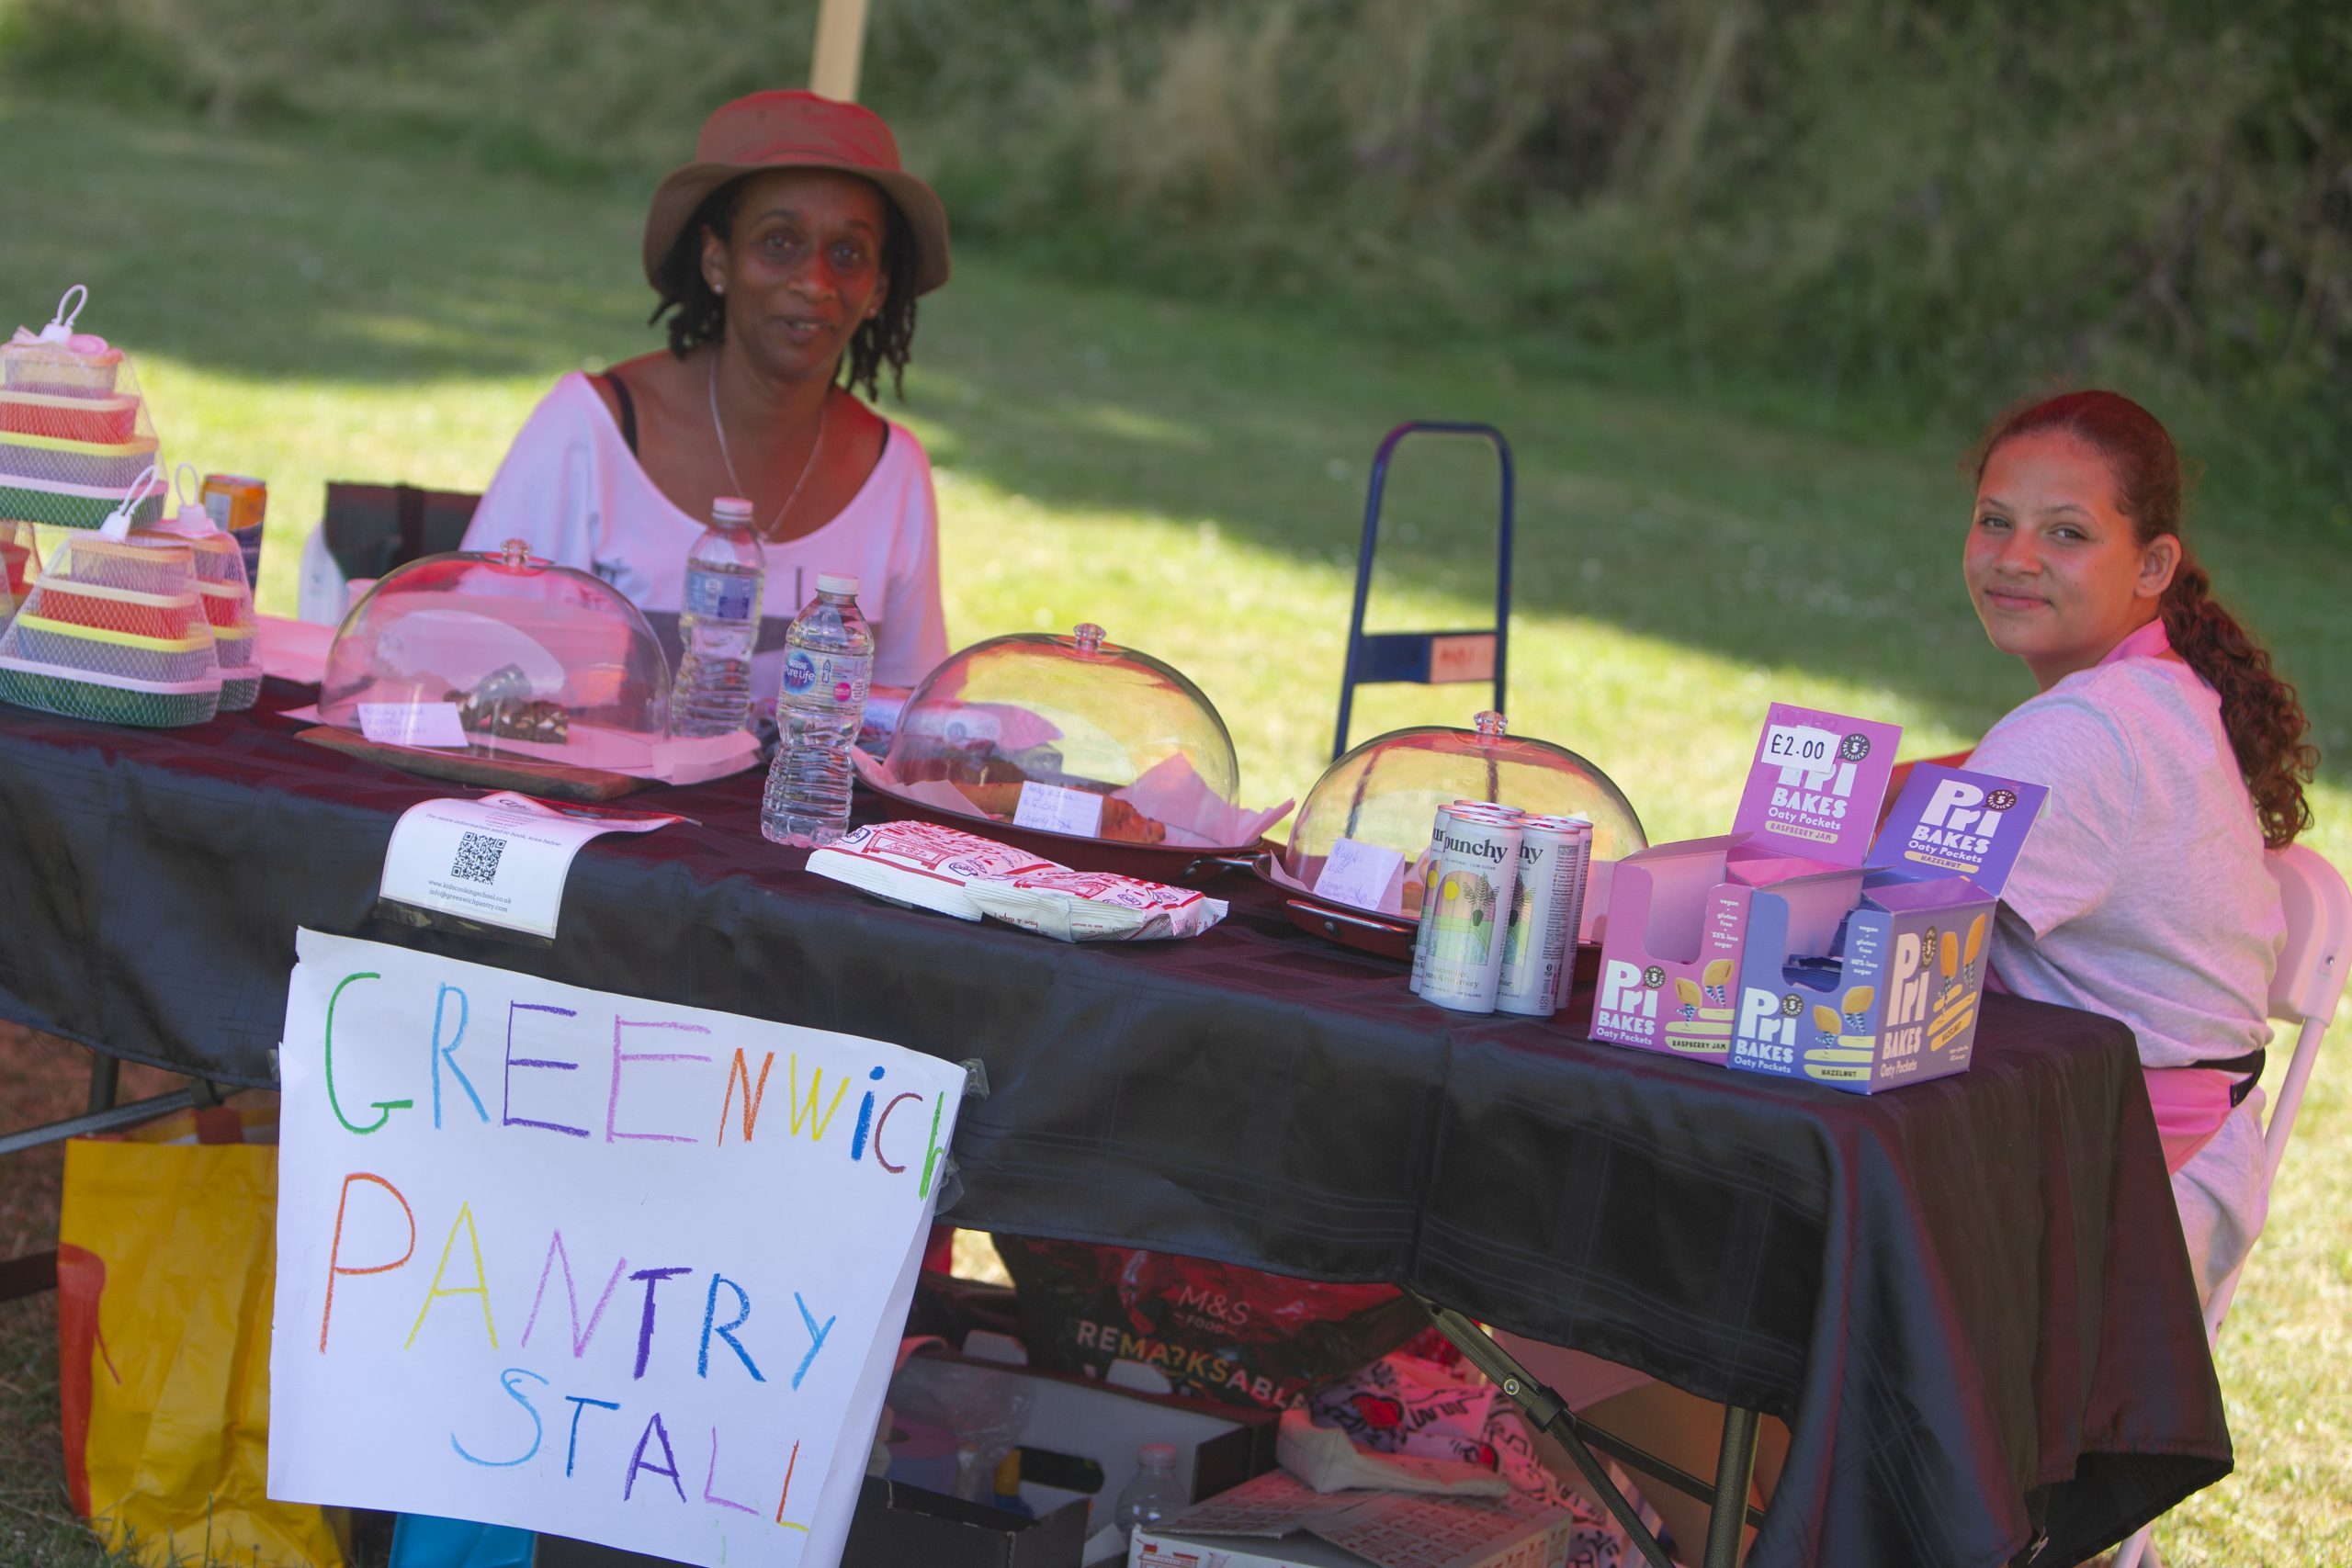 Remembering a glorious Summer in the Park. Two people from the Greenwich Pantry sit behind their display of cakes and their hand written sign which reads Greenwich Pantry Stall.